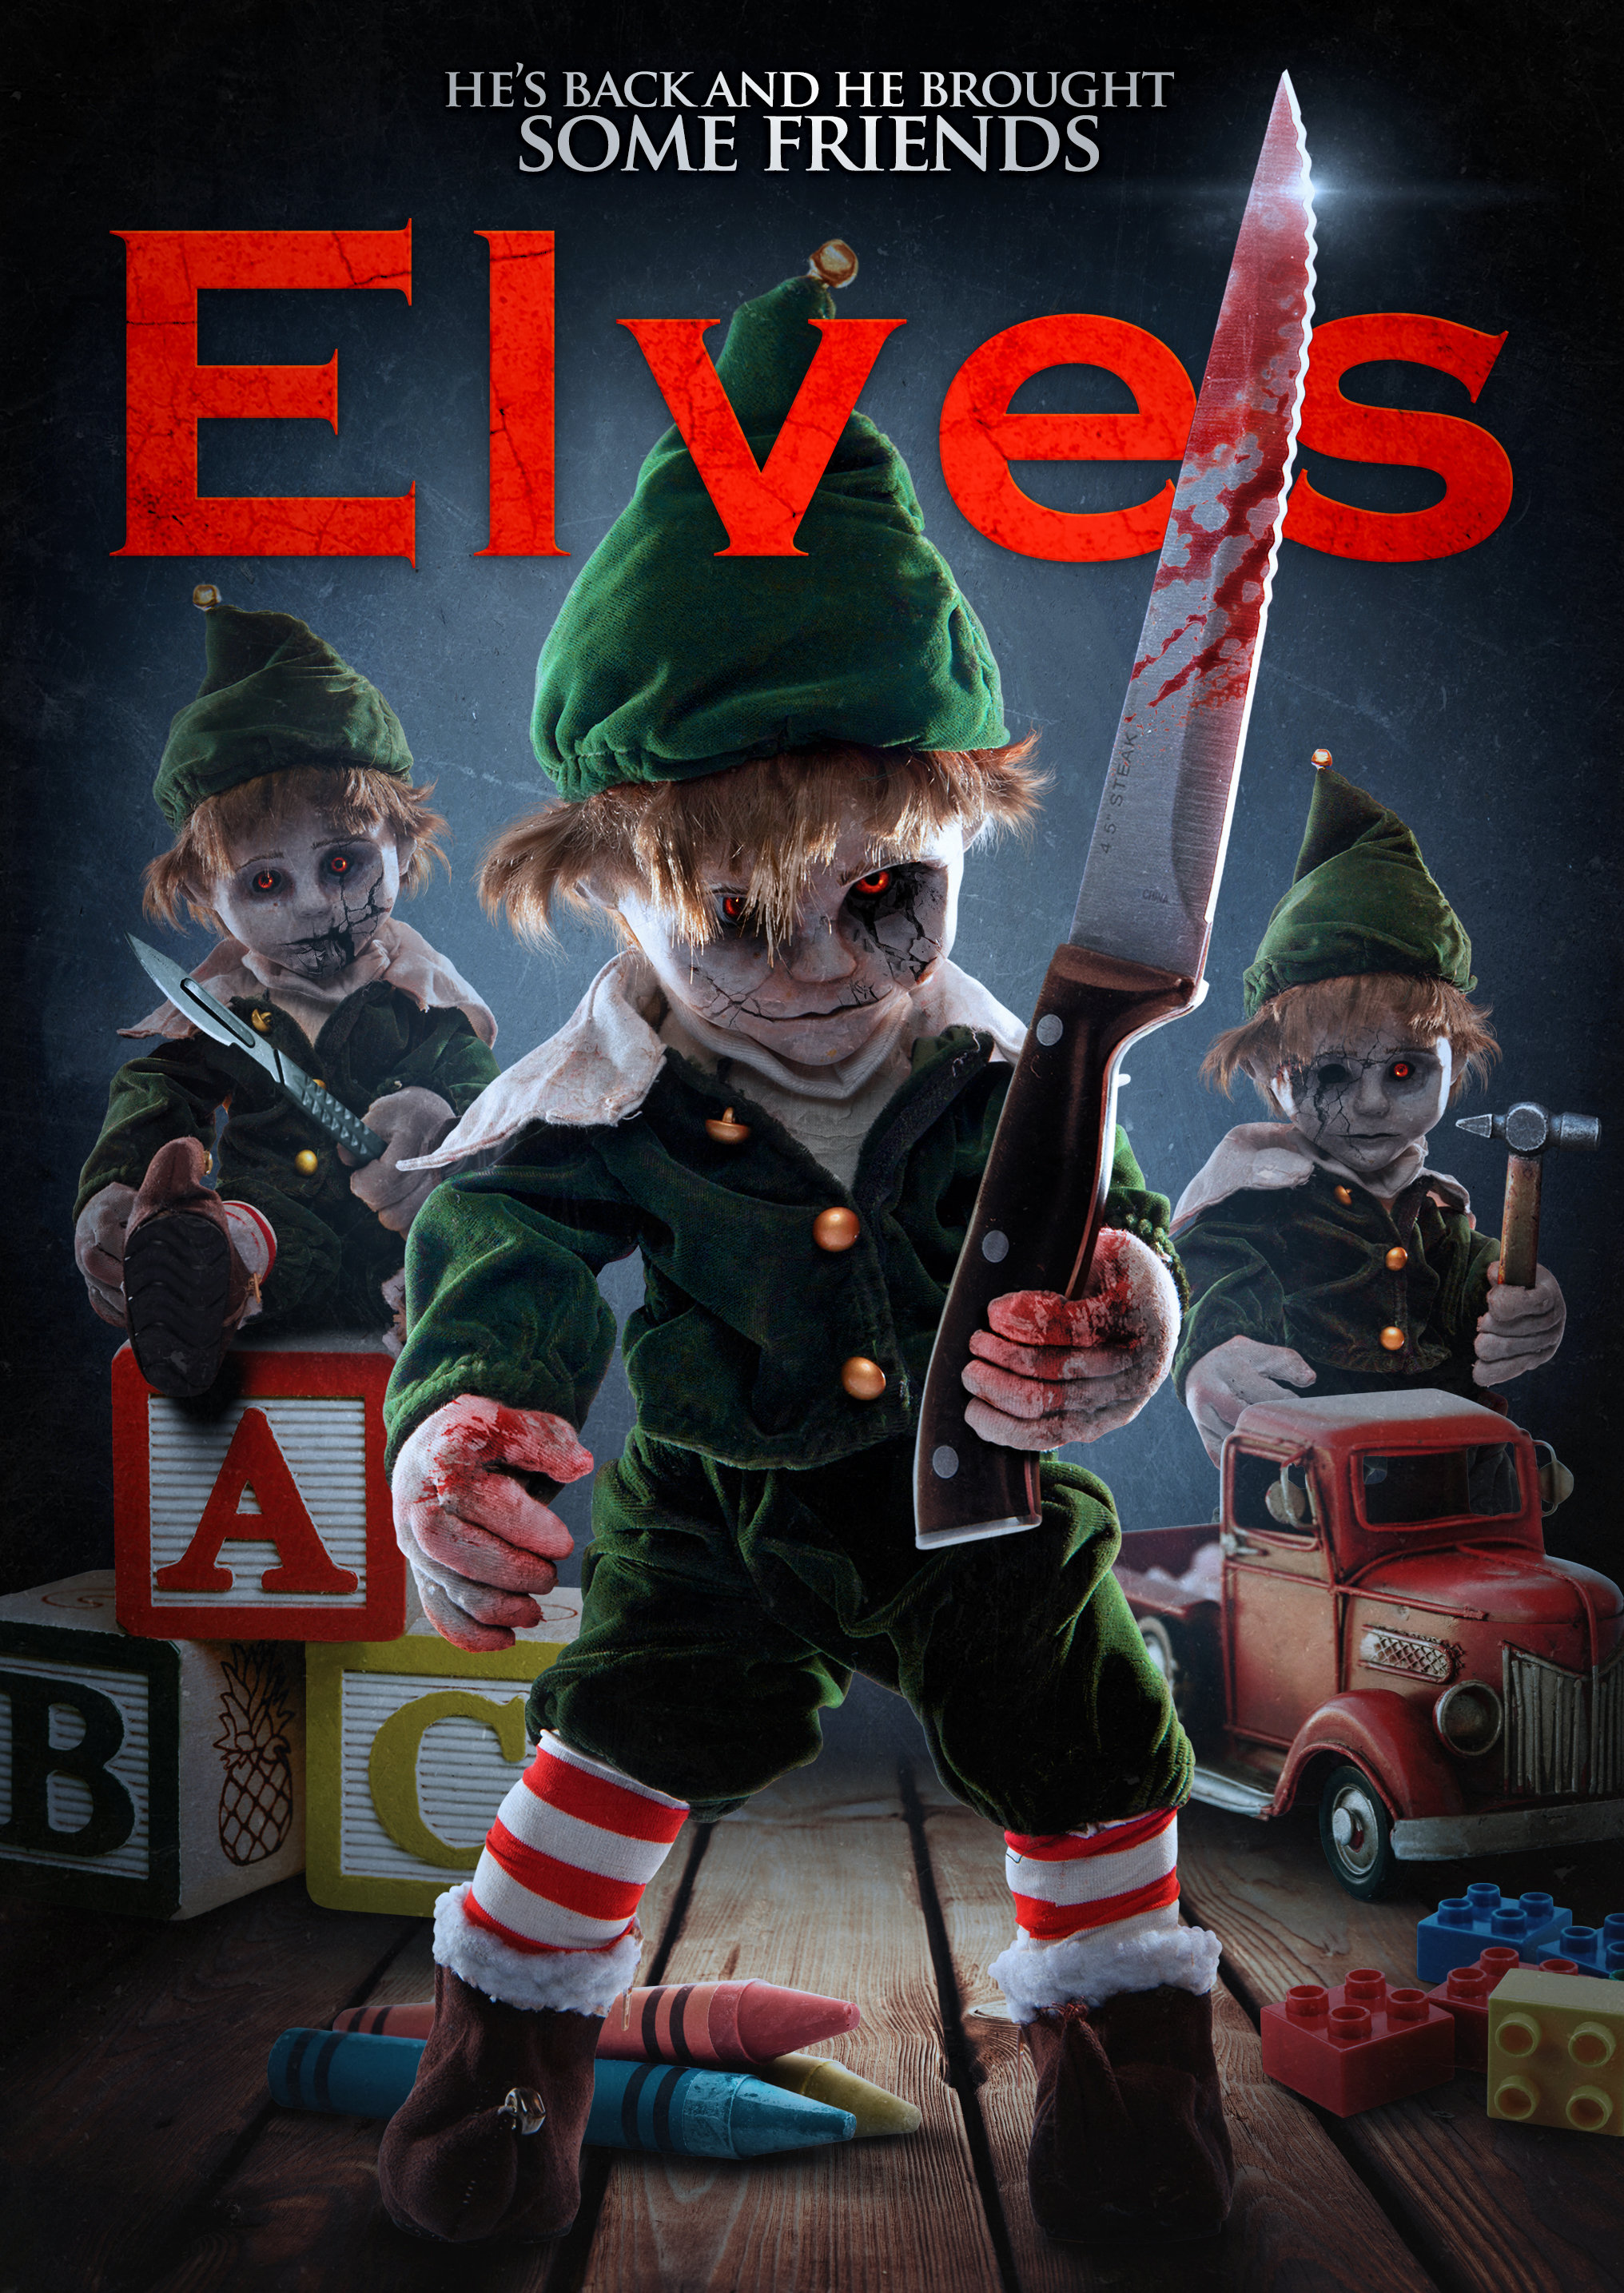 Horror Sequel ‘Elves’ Releases First Trailer Ahead of December Release!